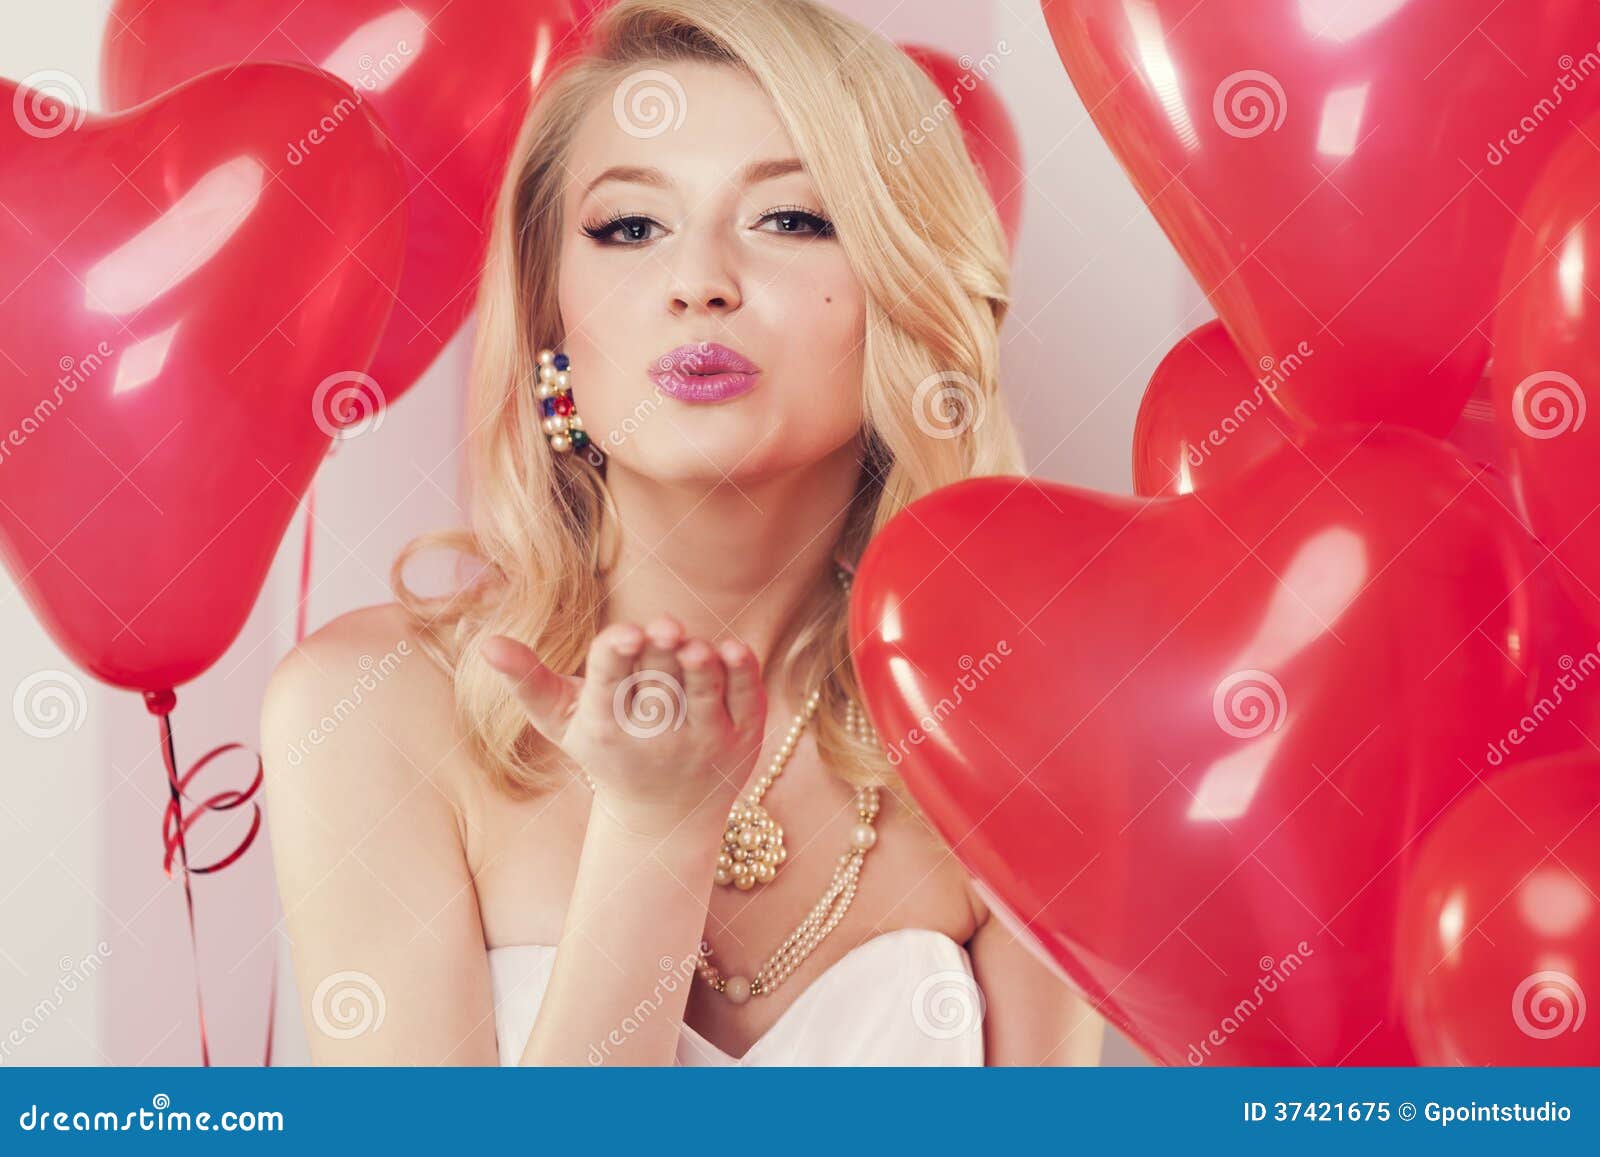 Cute Girl Blowing A Kiss Stock Image Image Of Passion 37421675